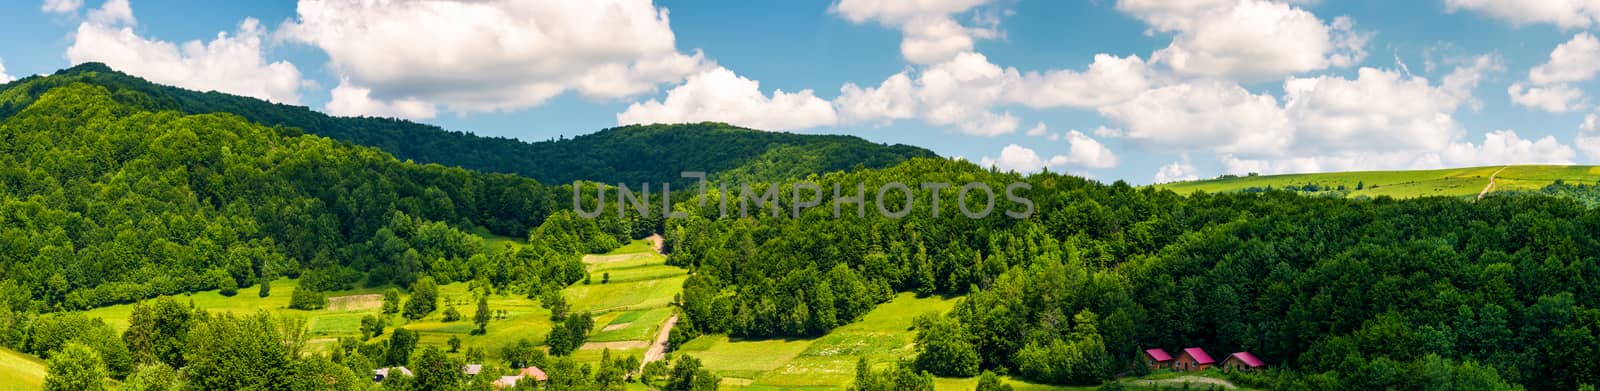 panorama of mountainous rural area in summer. beautiful landscape of the forested hill and village in the valley. agricultural fields on grassy slopes under the cloudy sky